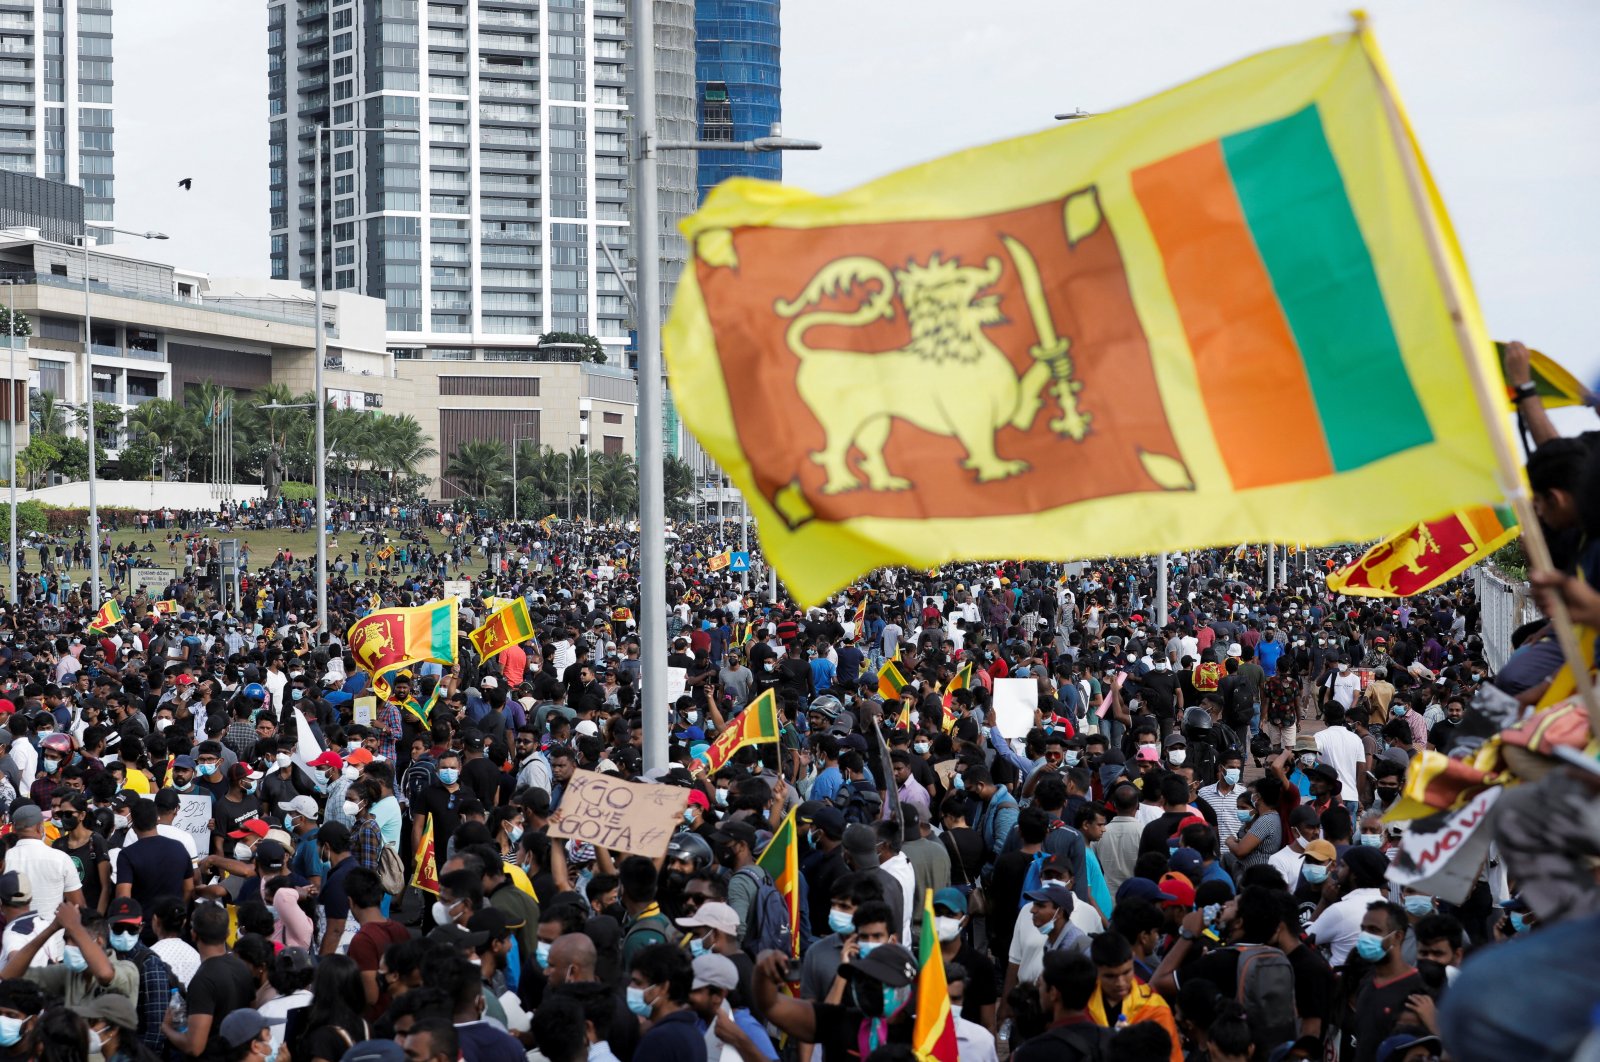 Protestors shout slogans during a protest against Sri Lanka&#039;s President Gotabaya Rajapaksa in front of the Presidential Secretariat, amid the country&#039;s economic crisis in Colombo, Sri Lanka, April 9, 2022. (Reuters Photo)